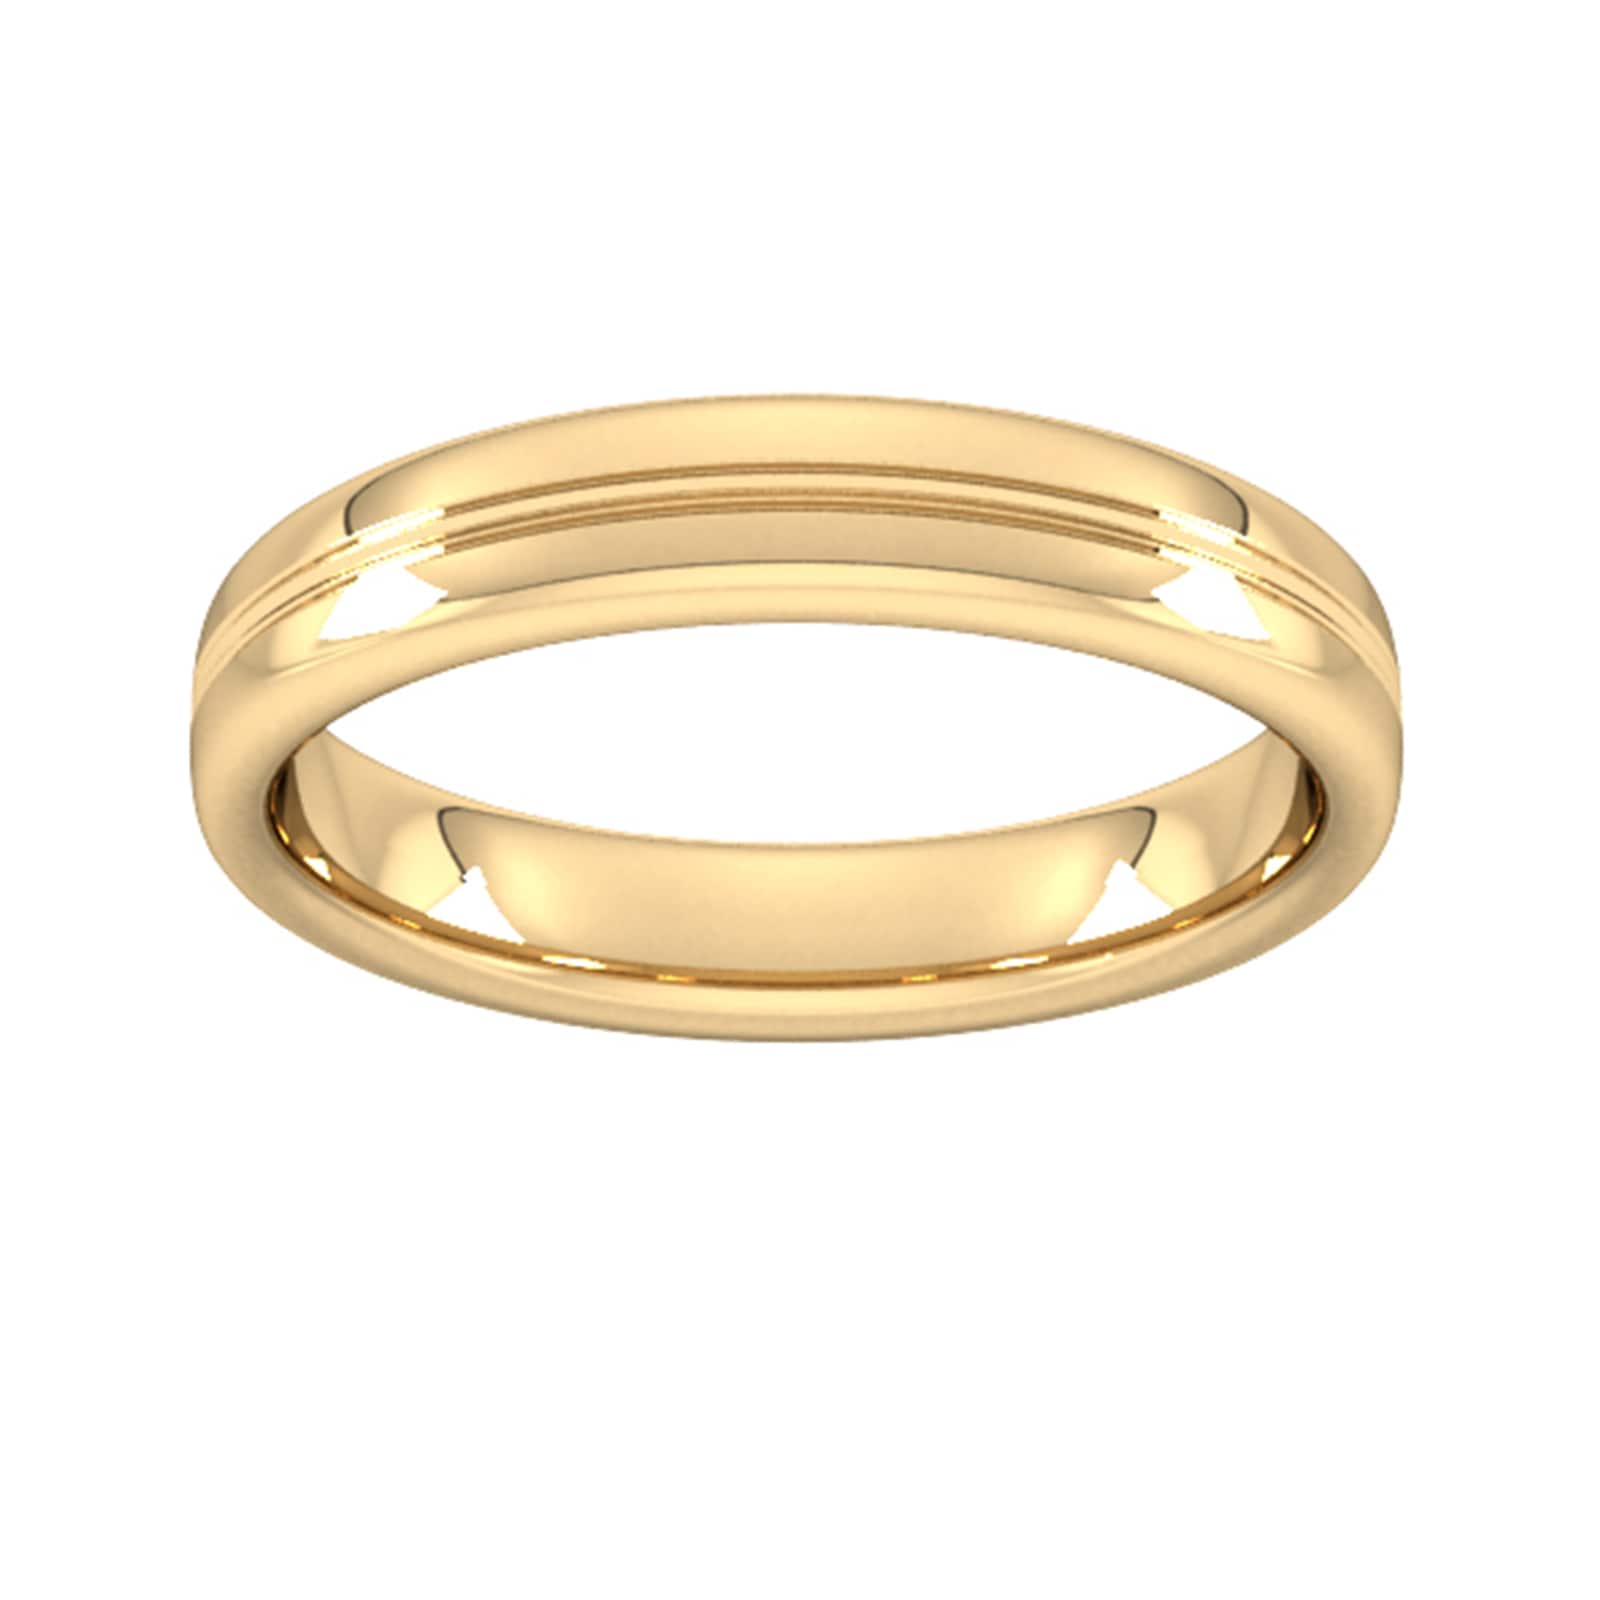 4mm Slight Court Extra Heavy Grooved Polished Finish Wedding Ring In 9 Carat Yellow Gold - Ring Size X